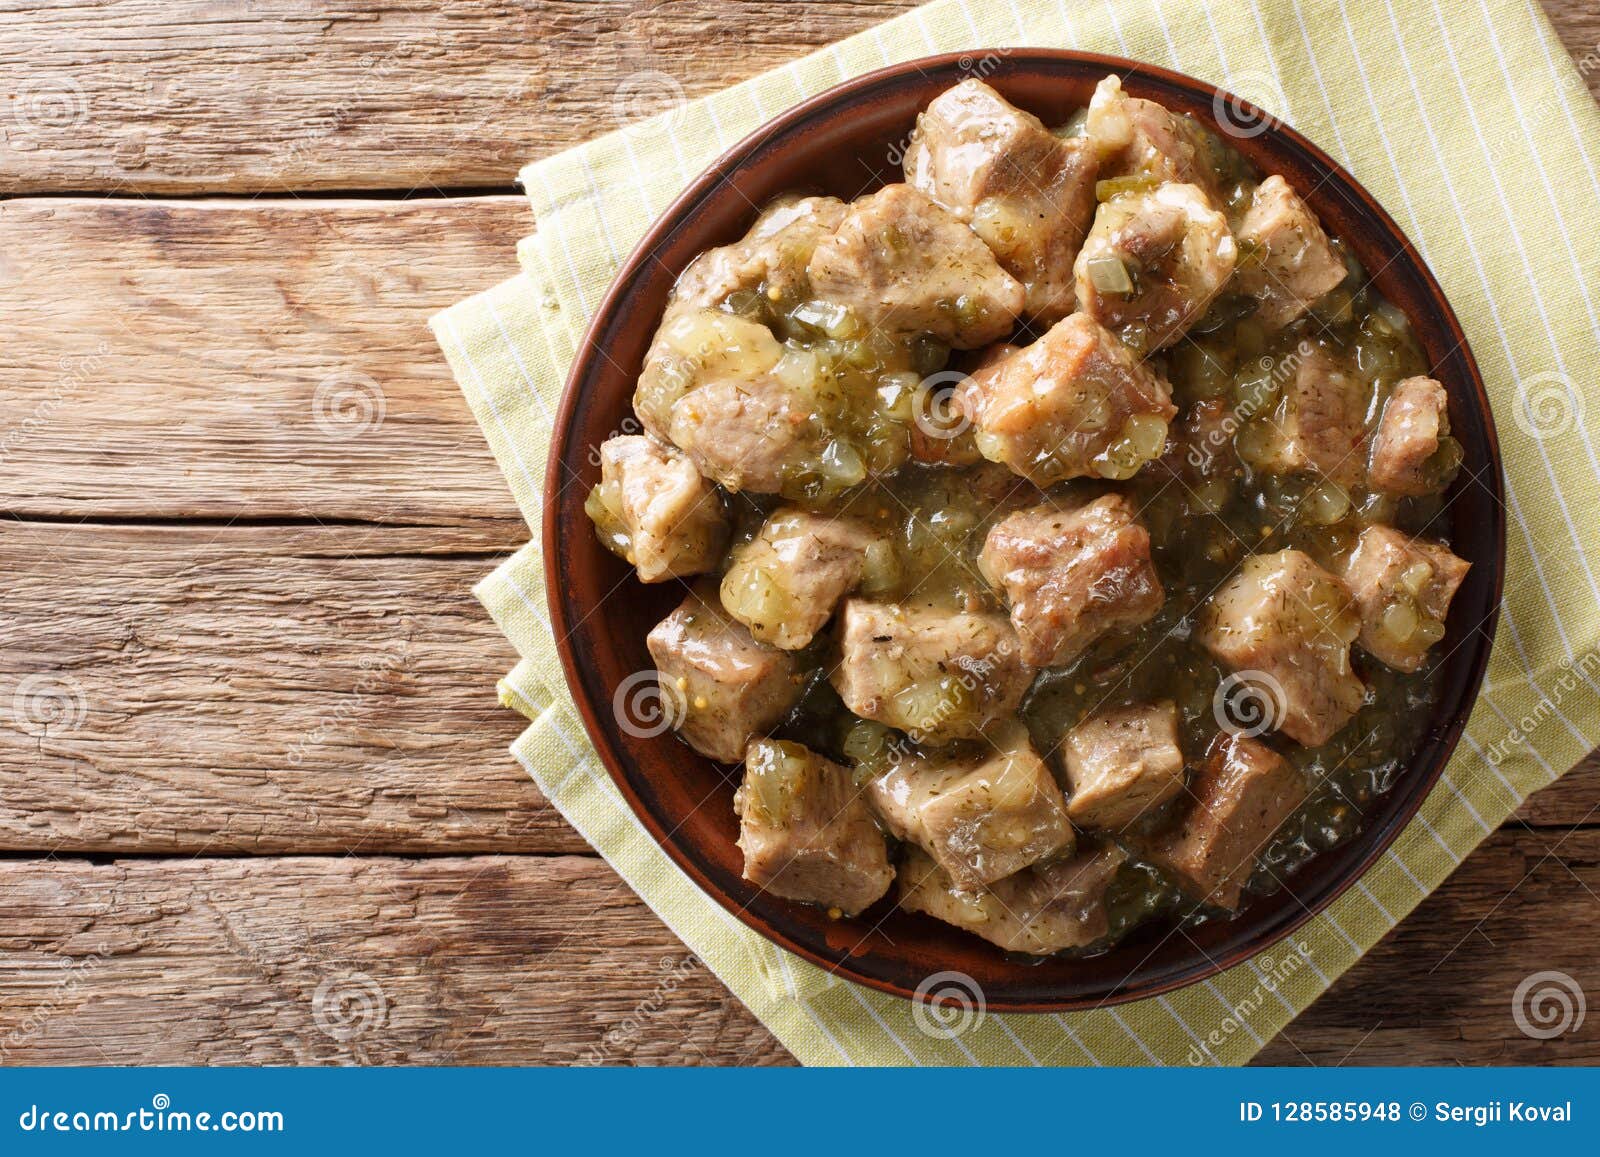 this authentic pork chile verde recipe. tender pieces of pork slow cooked with a green chile sauce (salsa verde) closeup. horizon